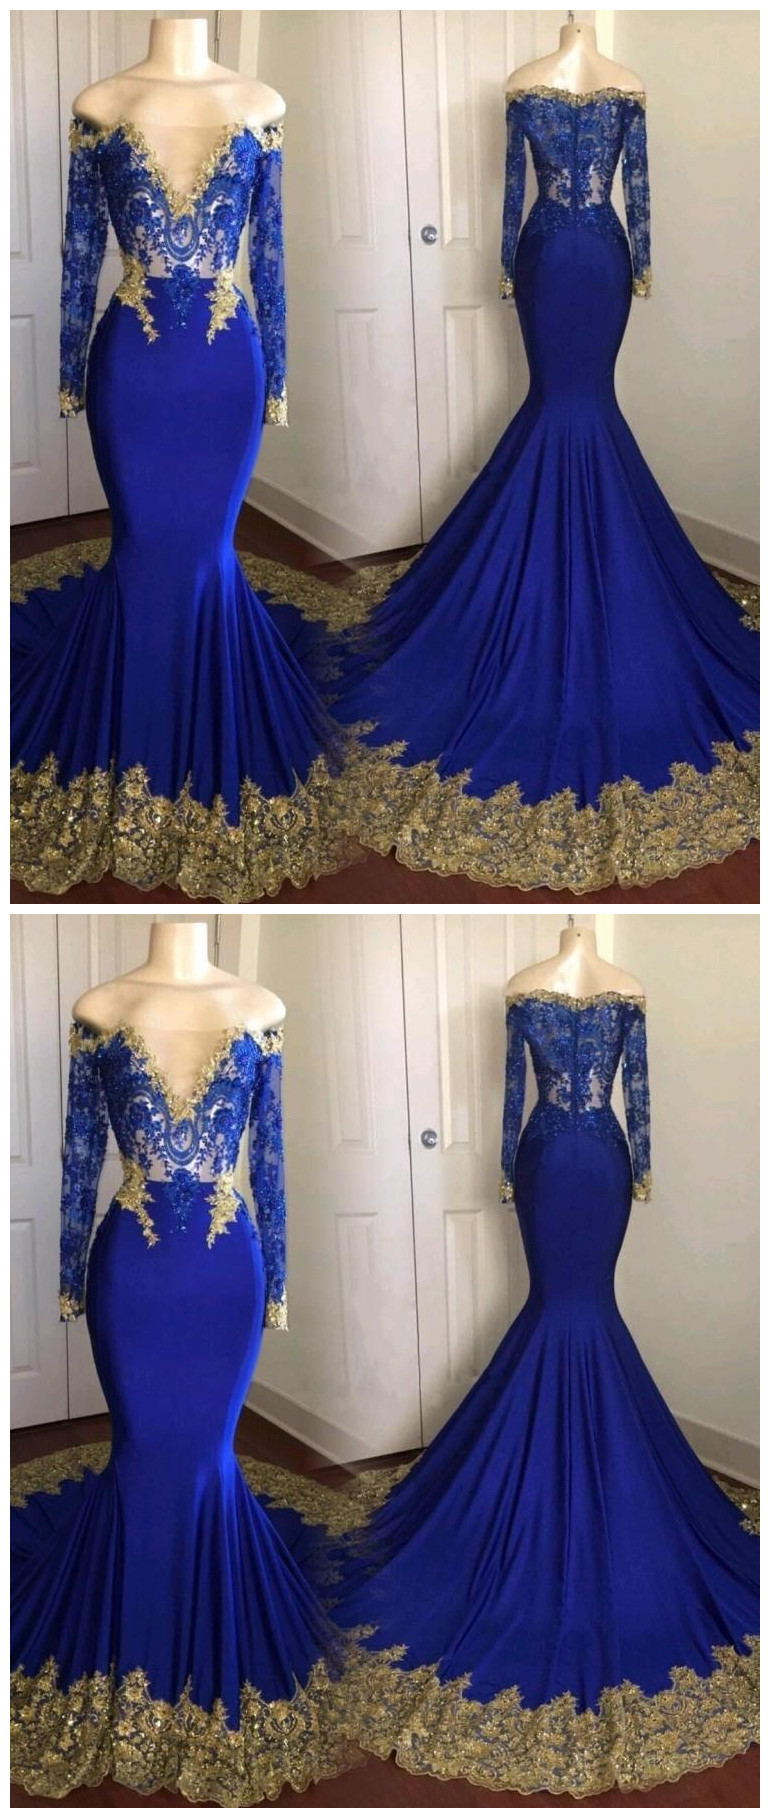 Royal Blue Long Sleeve Mermaid Prom Dresses Off The Shoulder Lace Appliques Court Train Party Dress Gowns